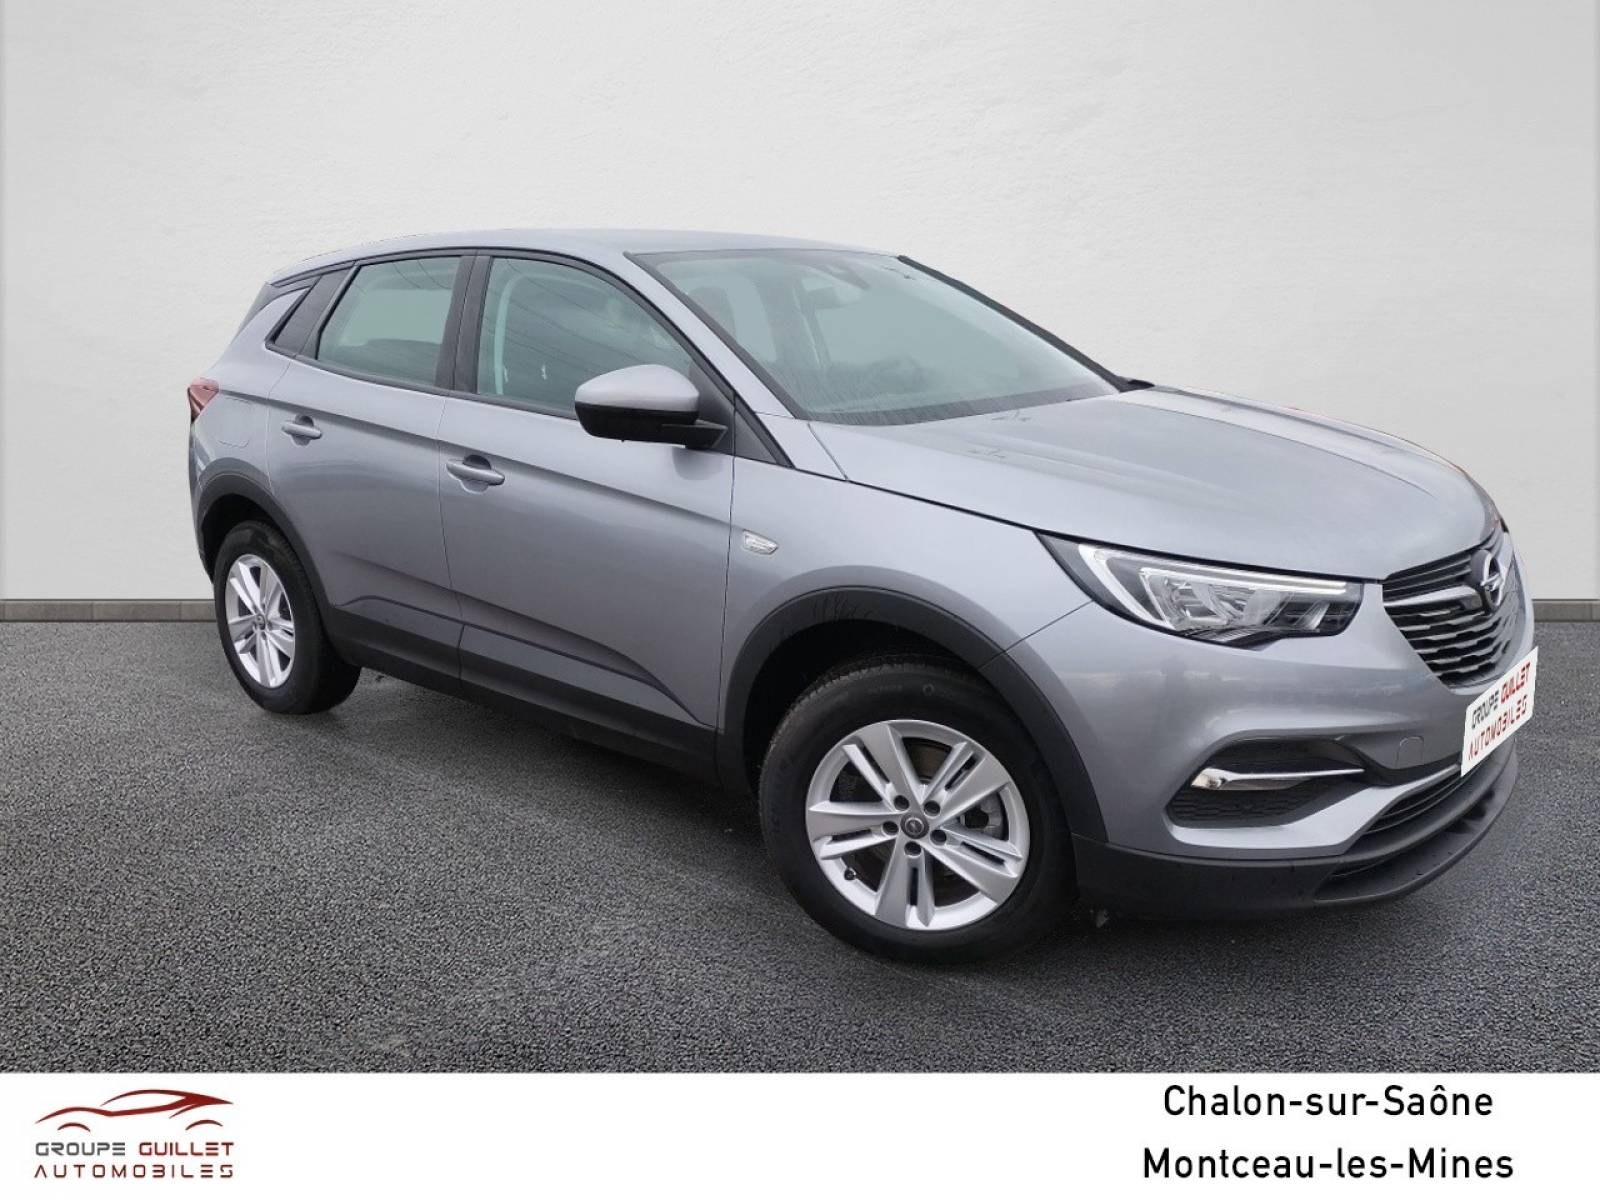 OPEL Grandland X 1.2 Turbo 130 ch - véhicule d'occasion - Groupe Guillet - Opel Magicauto Chalon - 71380 - Saint-Marcel - 3